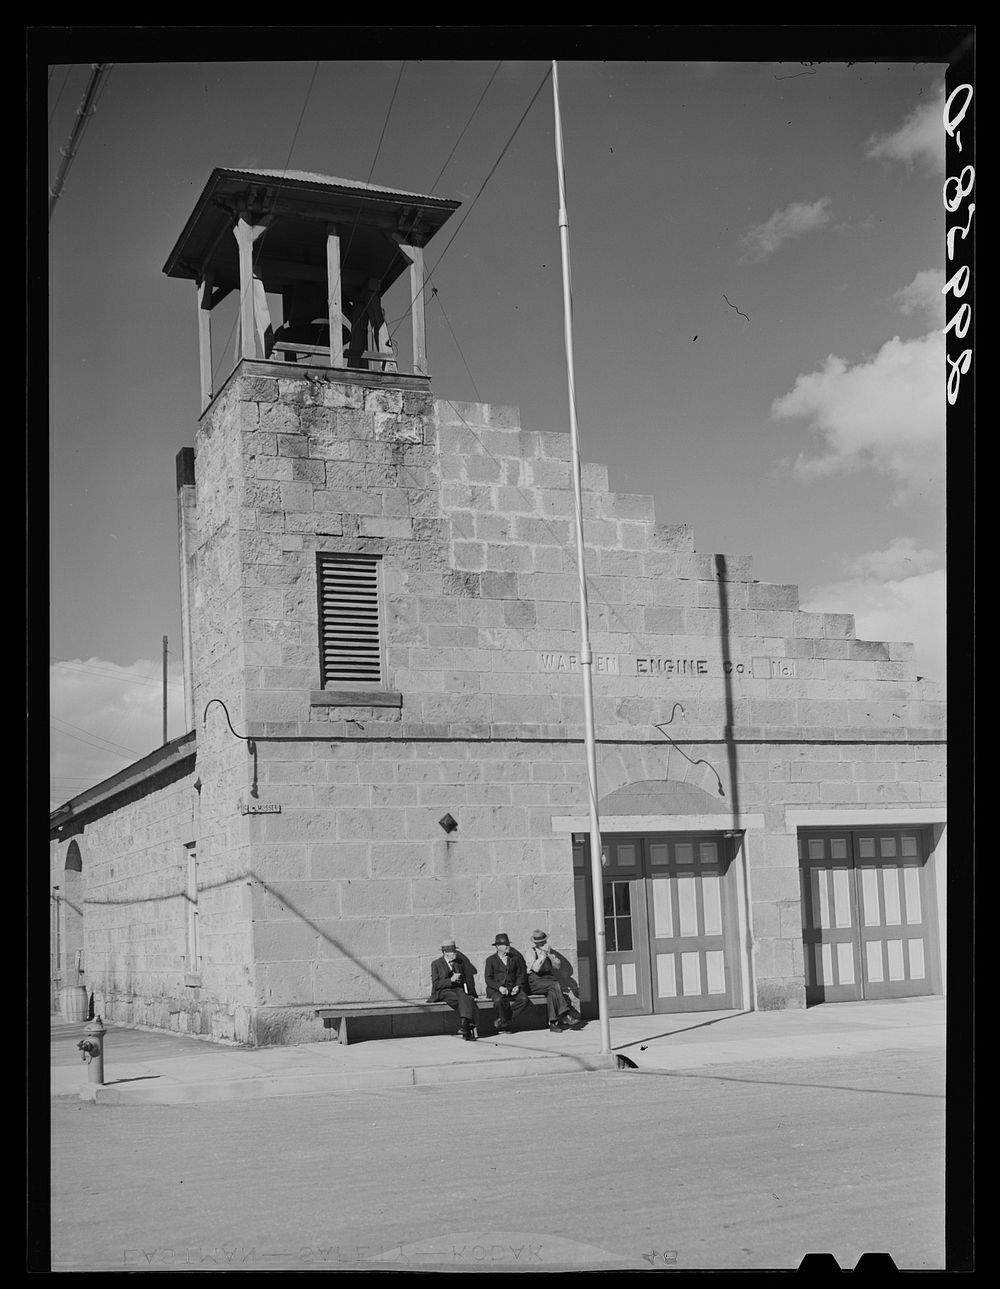 [Untitled photo, possibly related to: Firehouse. Carson City, Nevada]. Sourced from the Library of Congress.